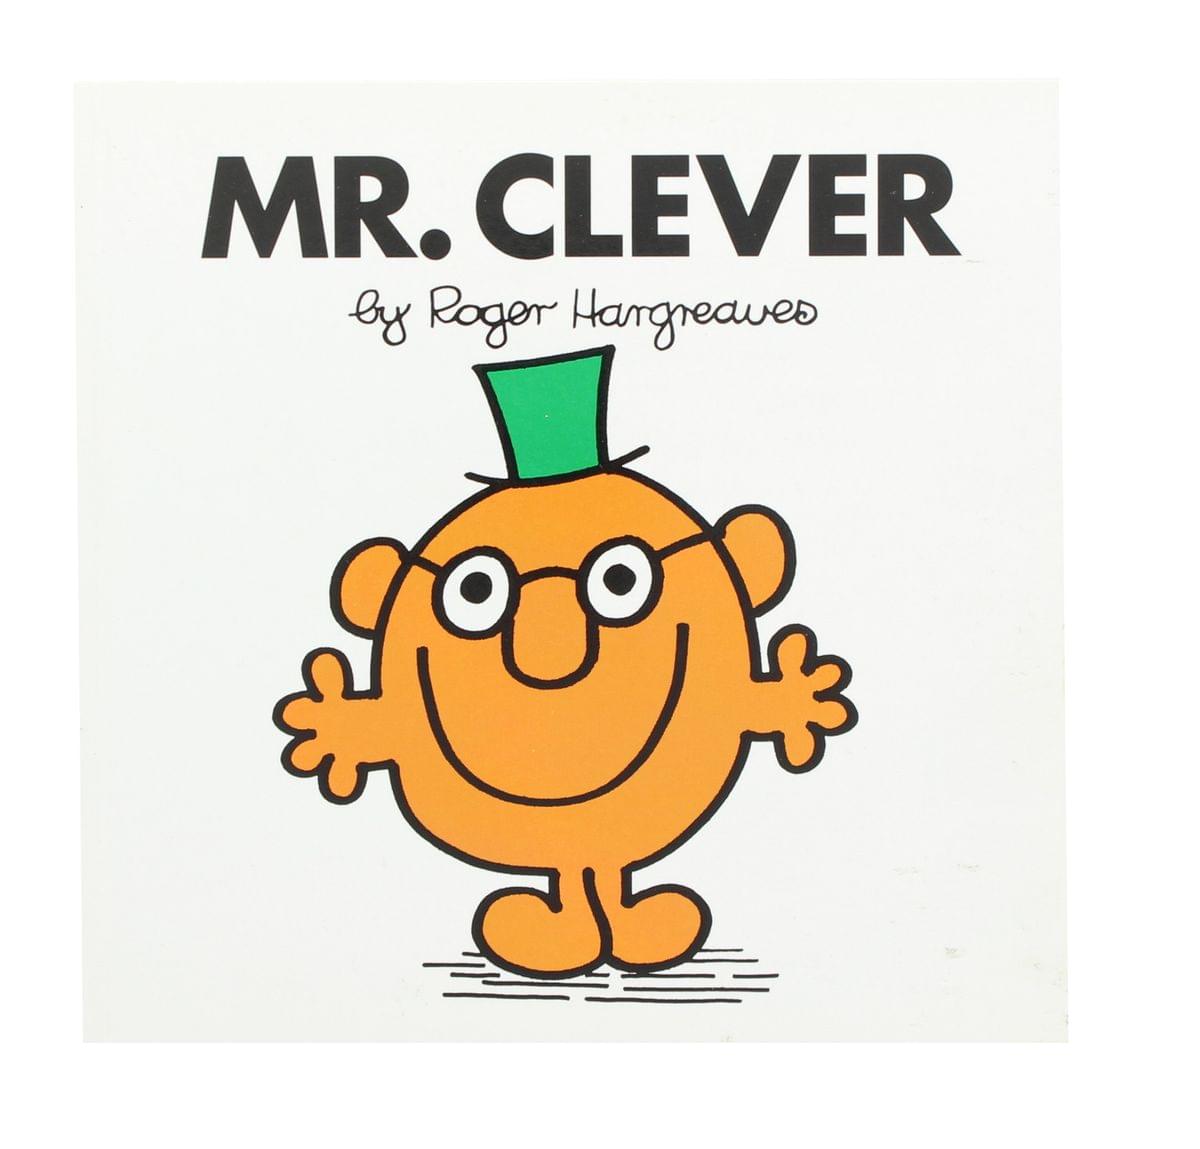 Mr. Clever Chilldren's Book by Roger Hargreaves